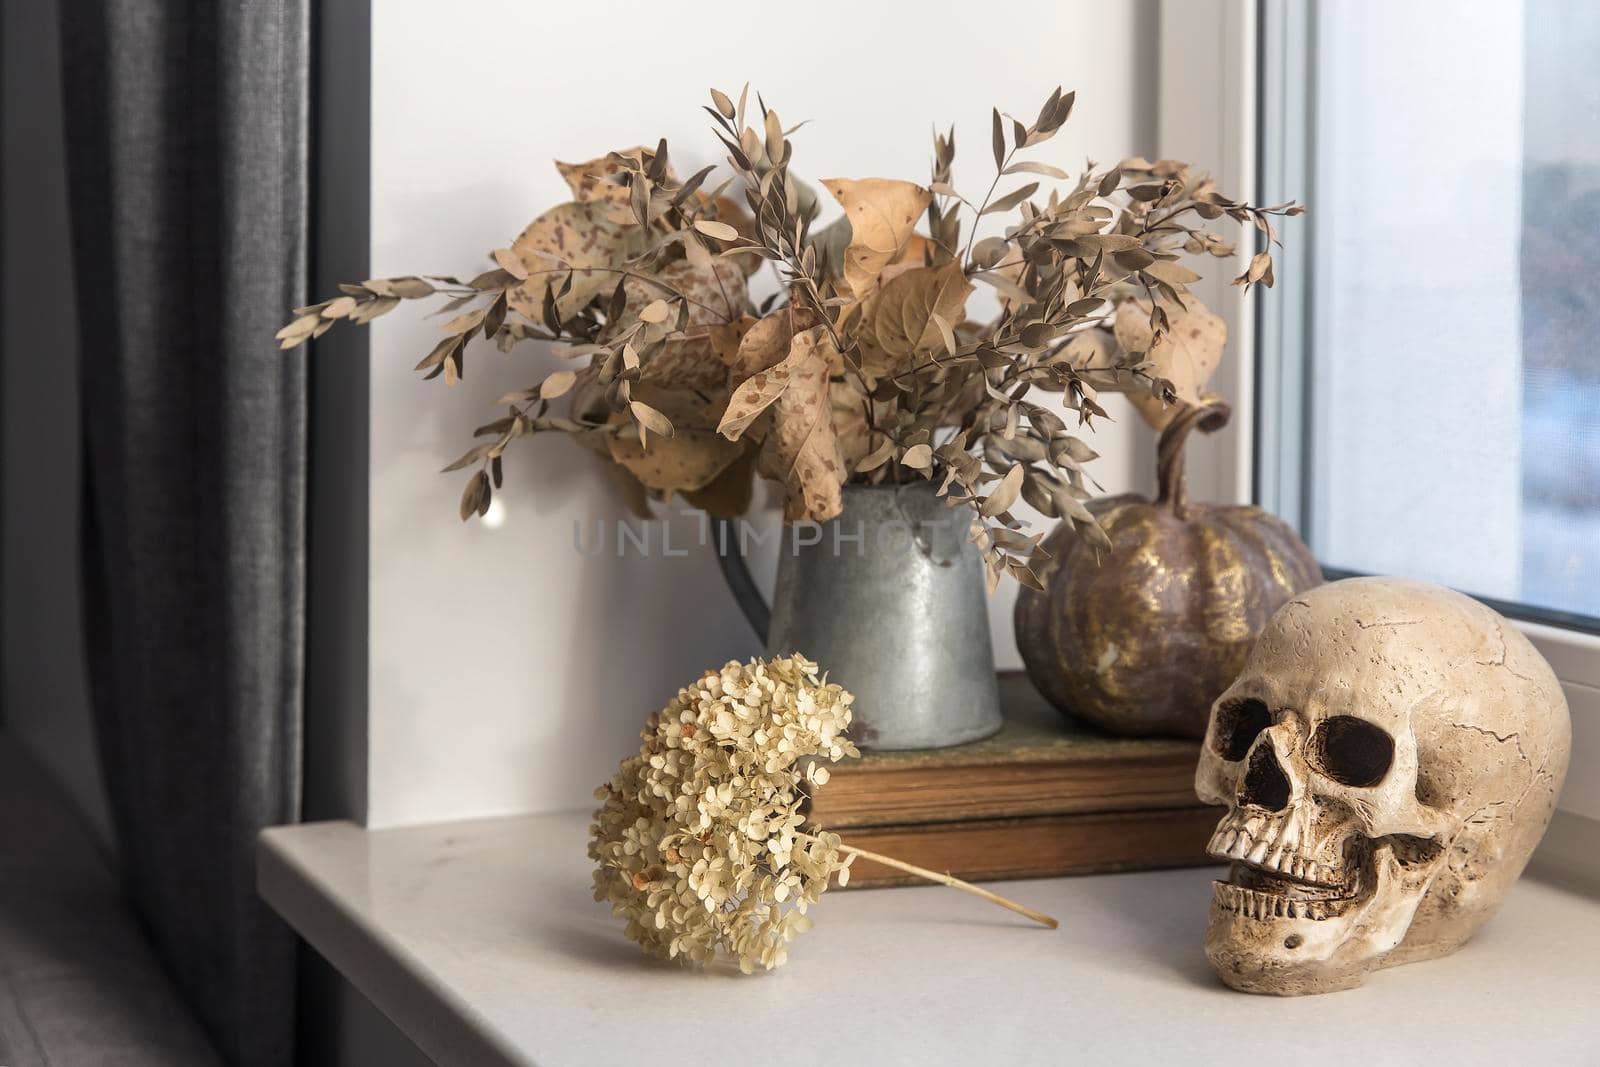 Bouquet of dried autumn leaves in a zinc jug, plastic skull, artificial gilded pumpkin, vintage books decorate the window for Halloween